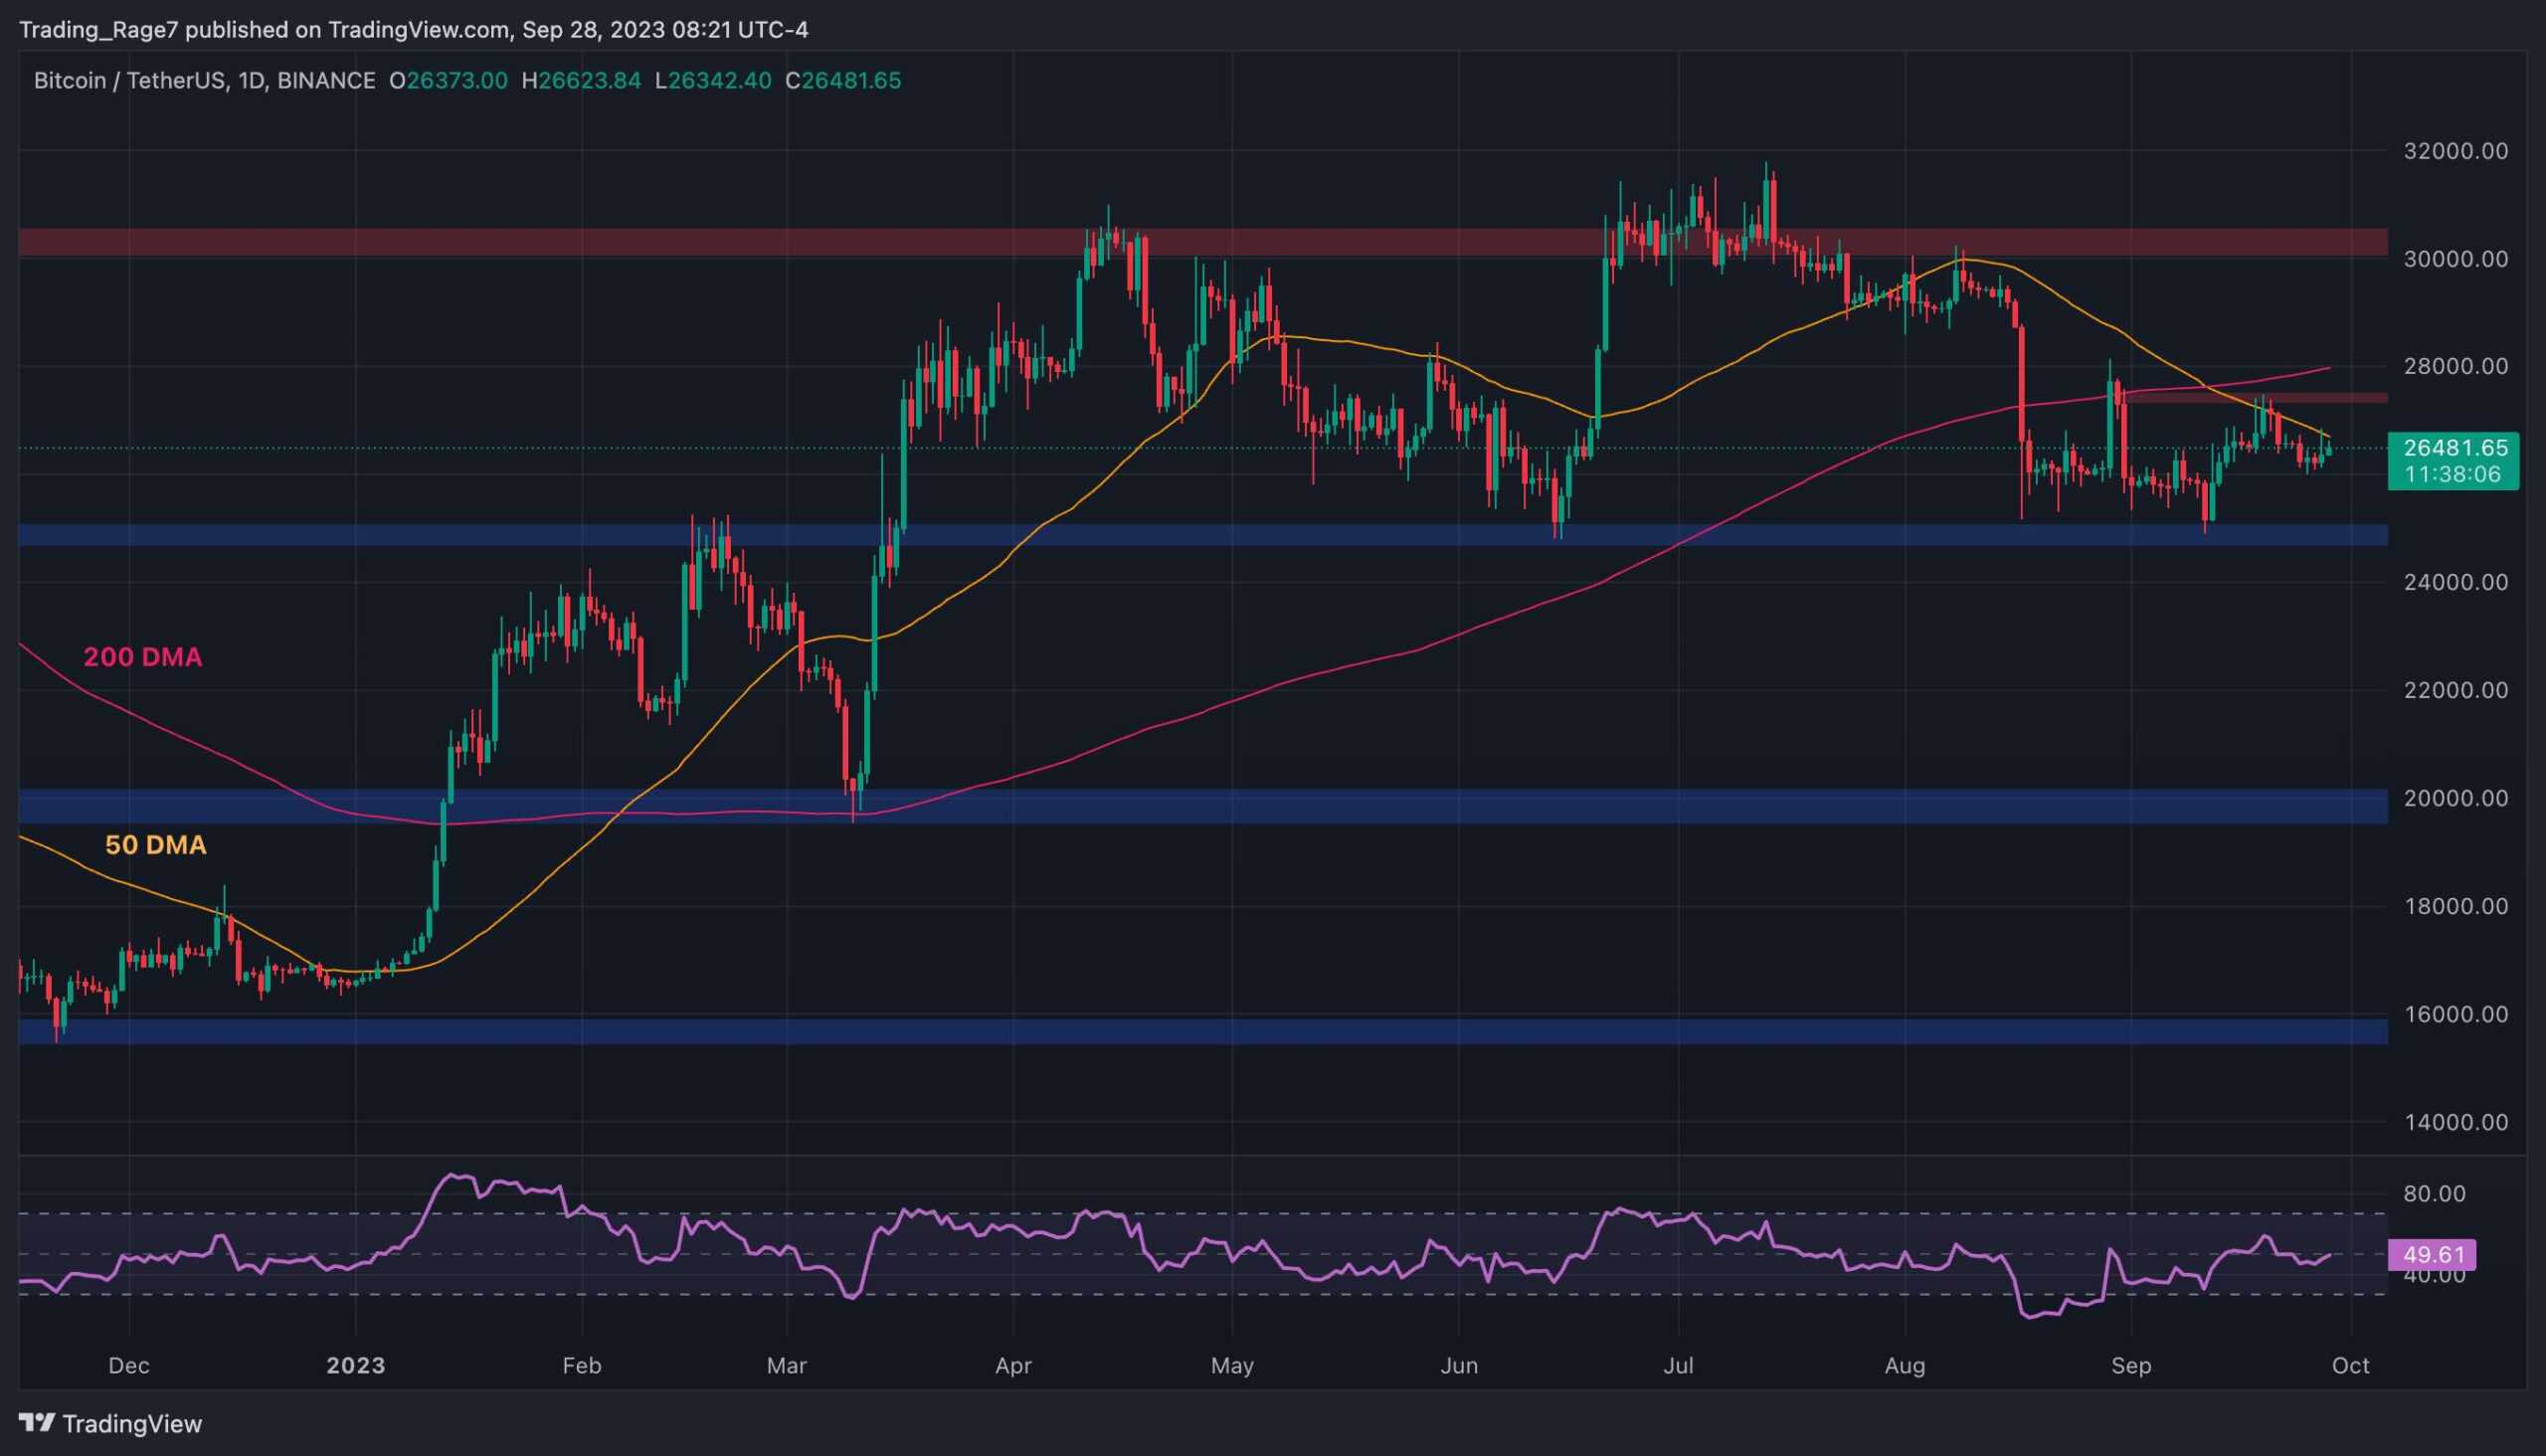 Bitcoin on the Verge of a Massive Move, But Whic Way? (BTC Price Analysis)